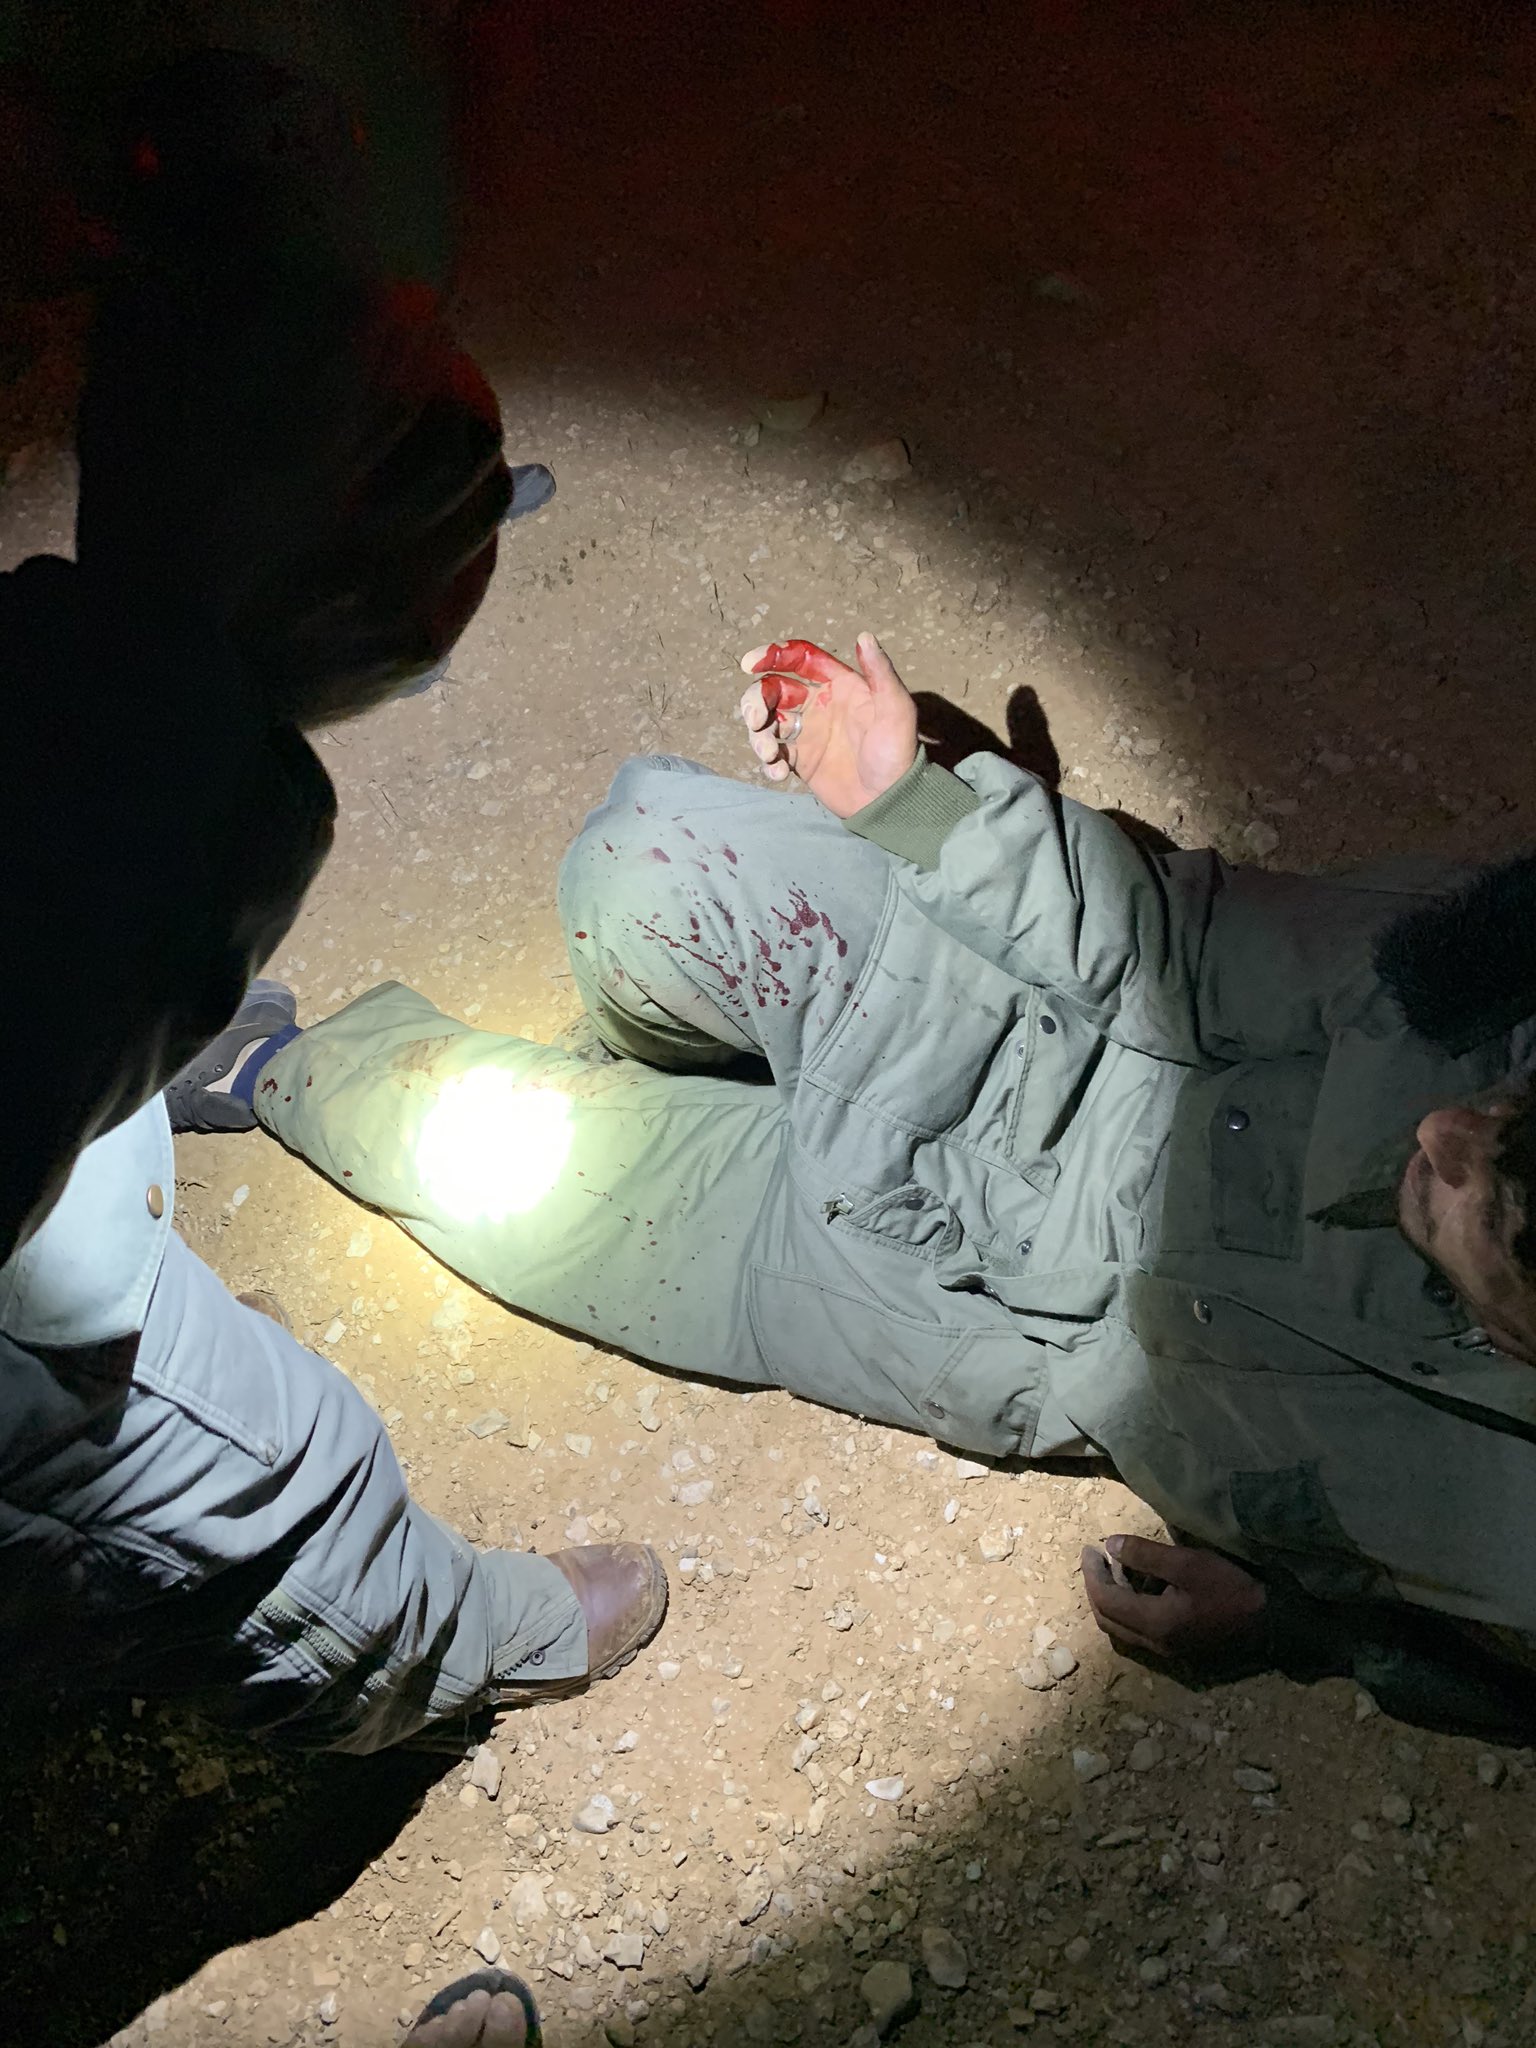 Injury to hand sustained by Arab during altercation near Mitzpe Yair.